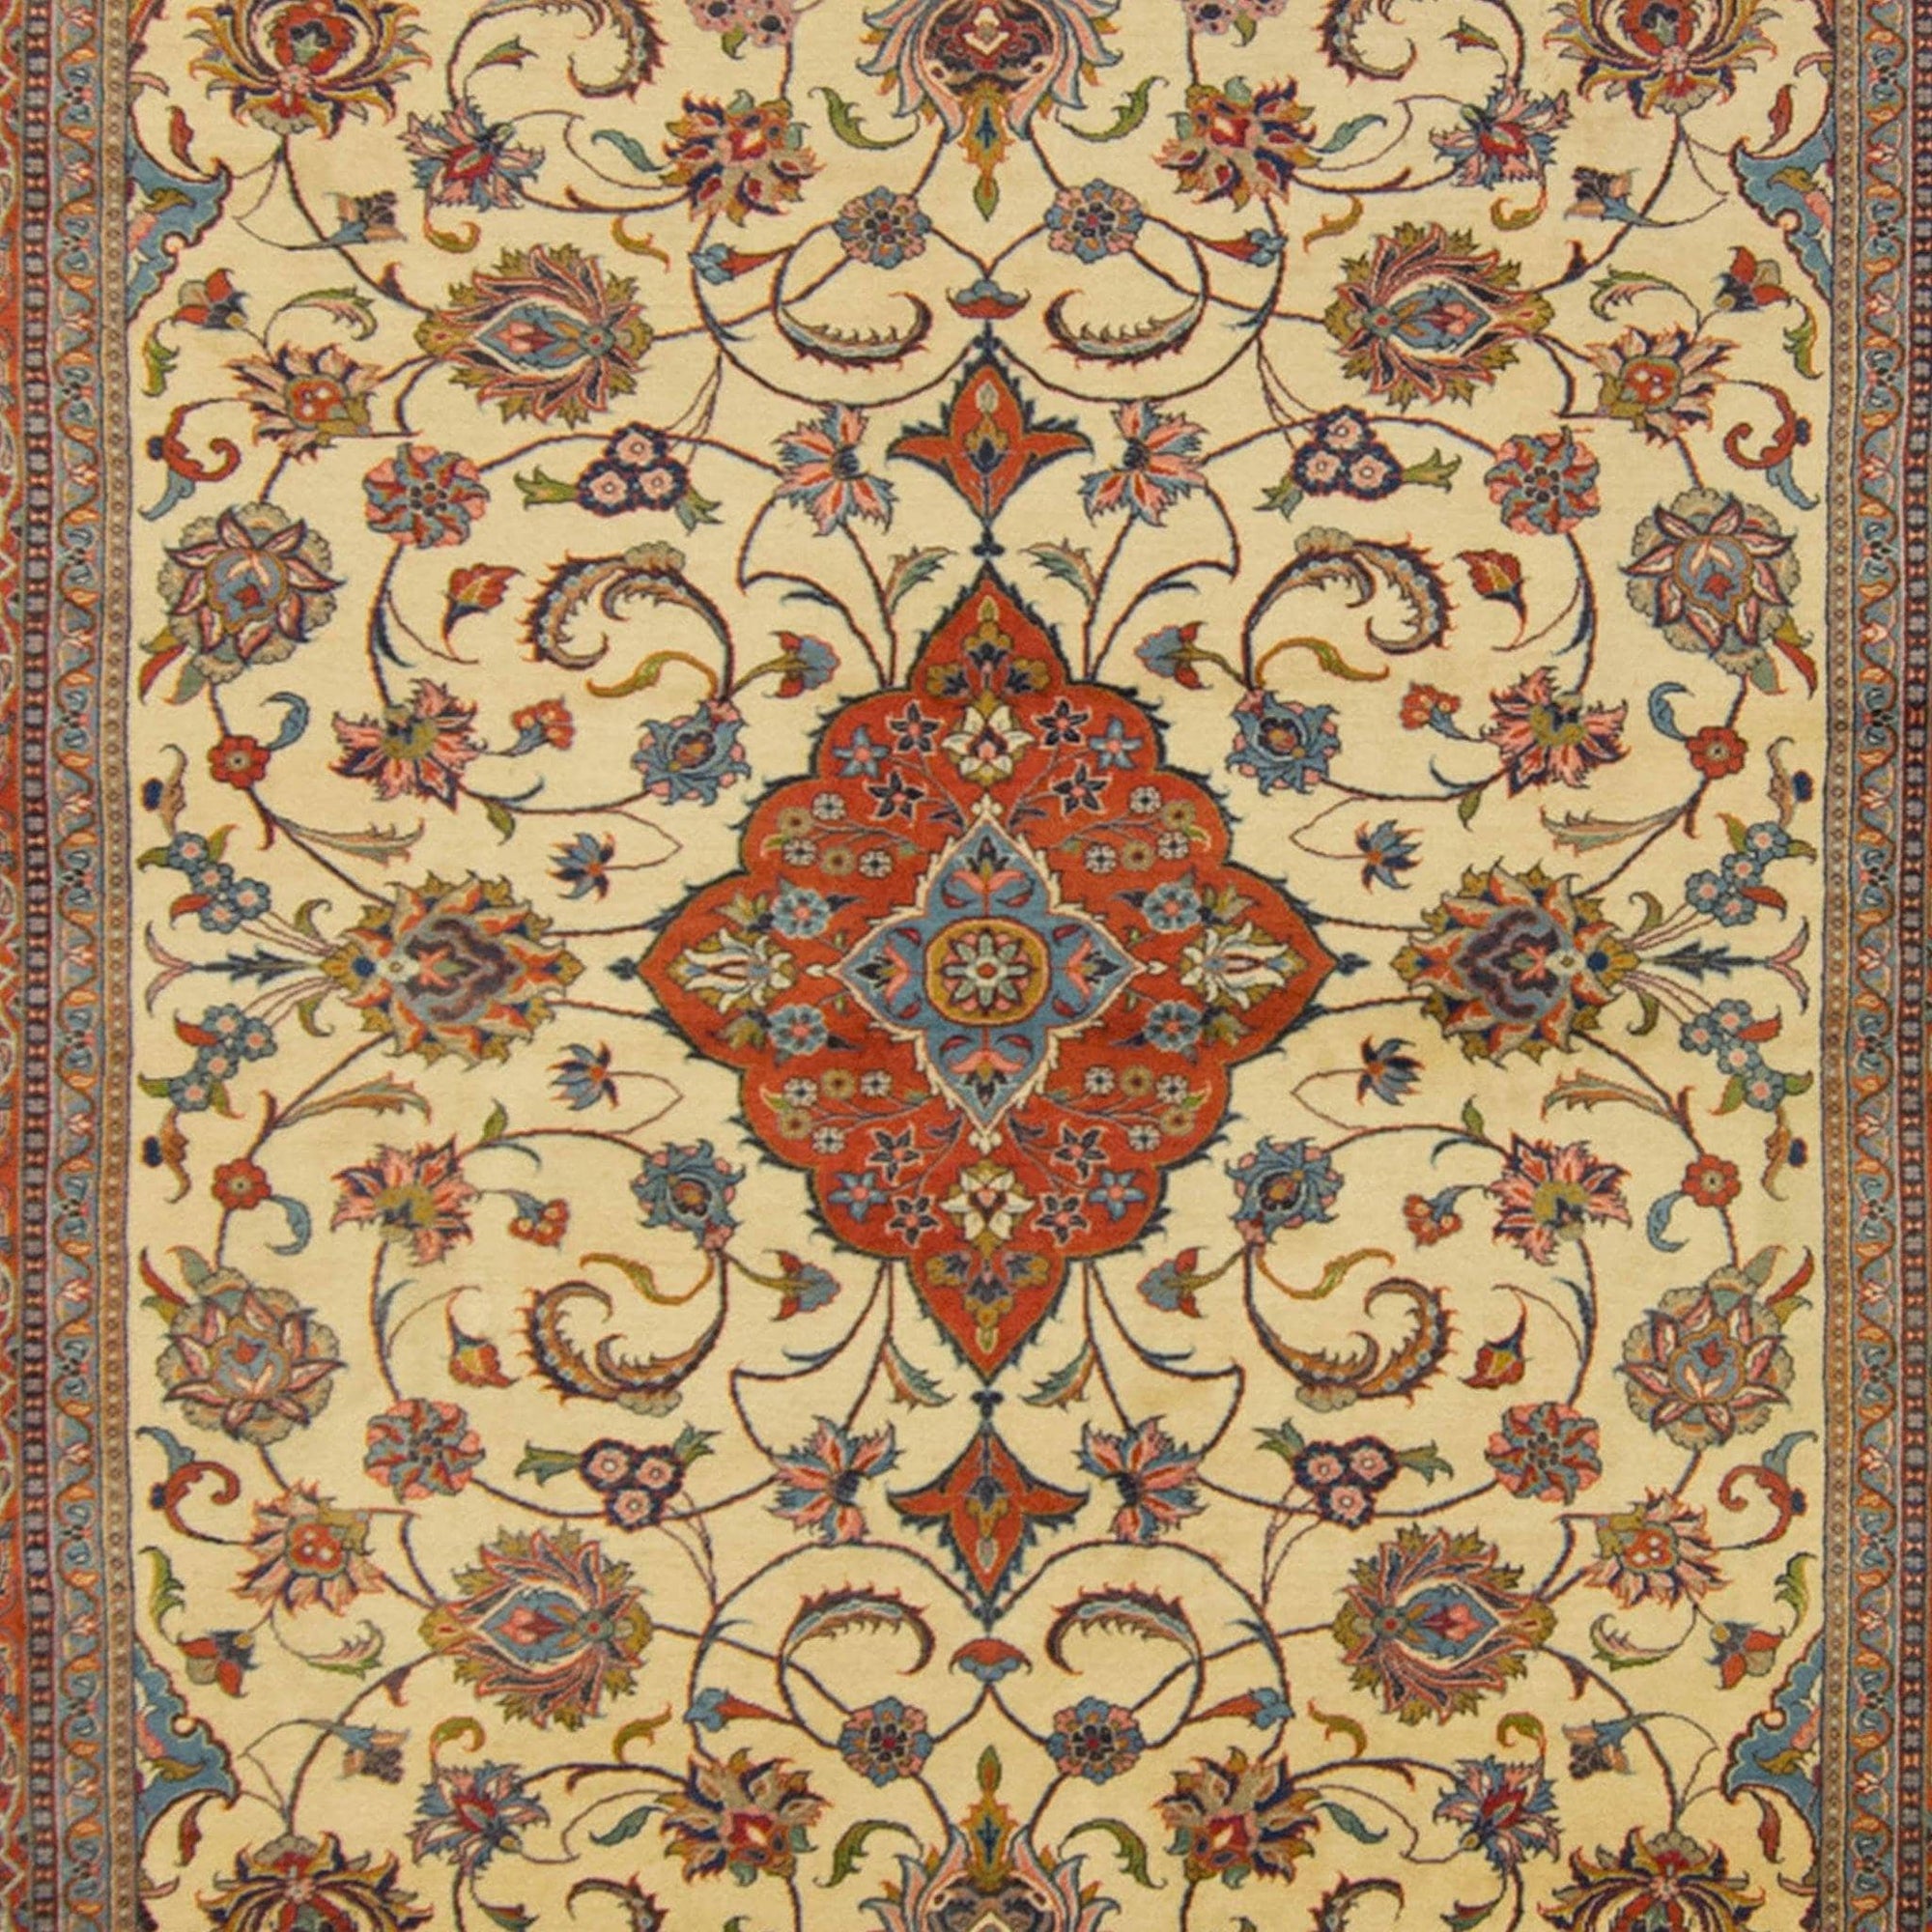 Fine Hand-knotted Persian Saruk Rug 245cm x 340cm